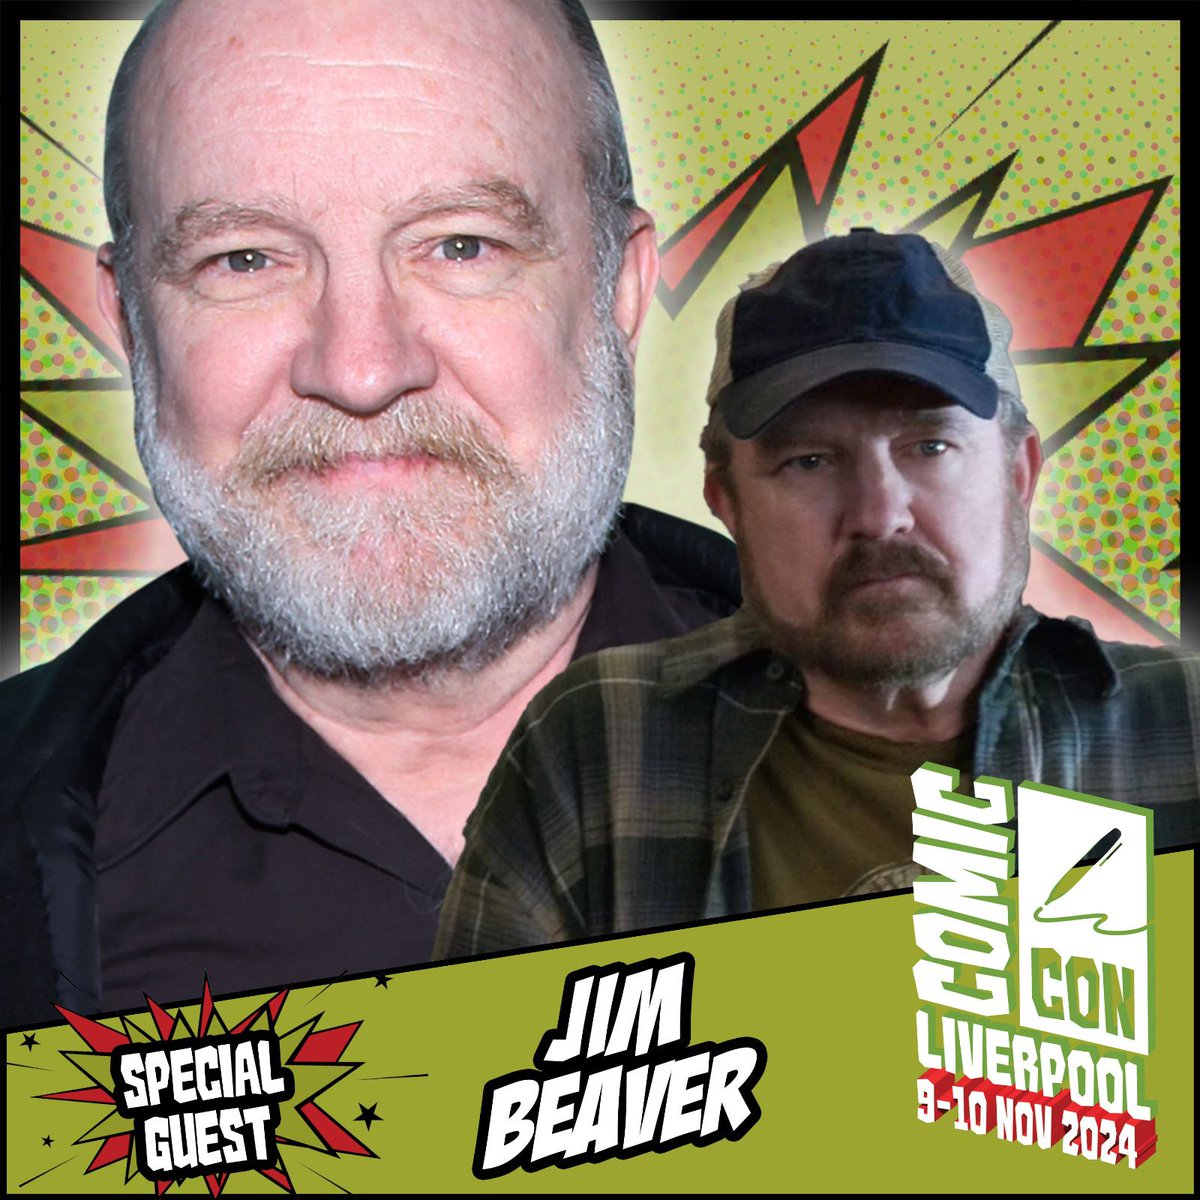 Comic Con Liverpool welcomes Jim Beaver, known for projects such as Supernatural, Deadwood, The Boys, and many more. Appearing 9-10 November! Tickets: comicconventionliverpool.co.uk